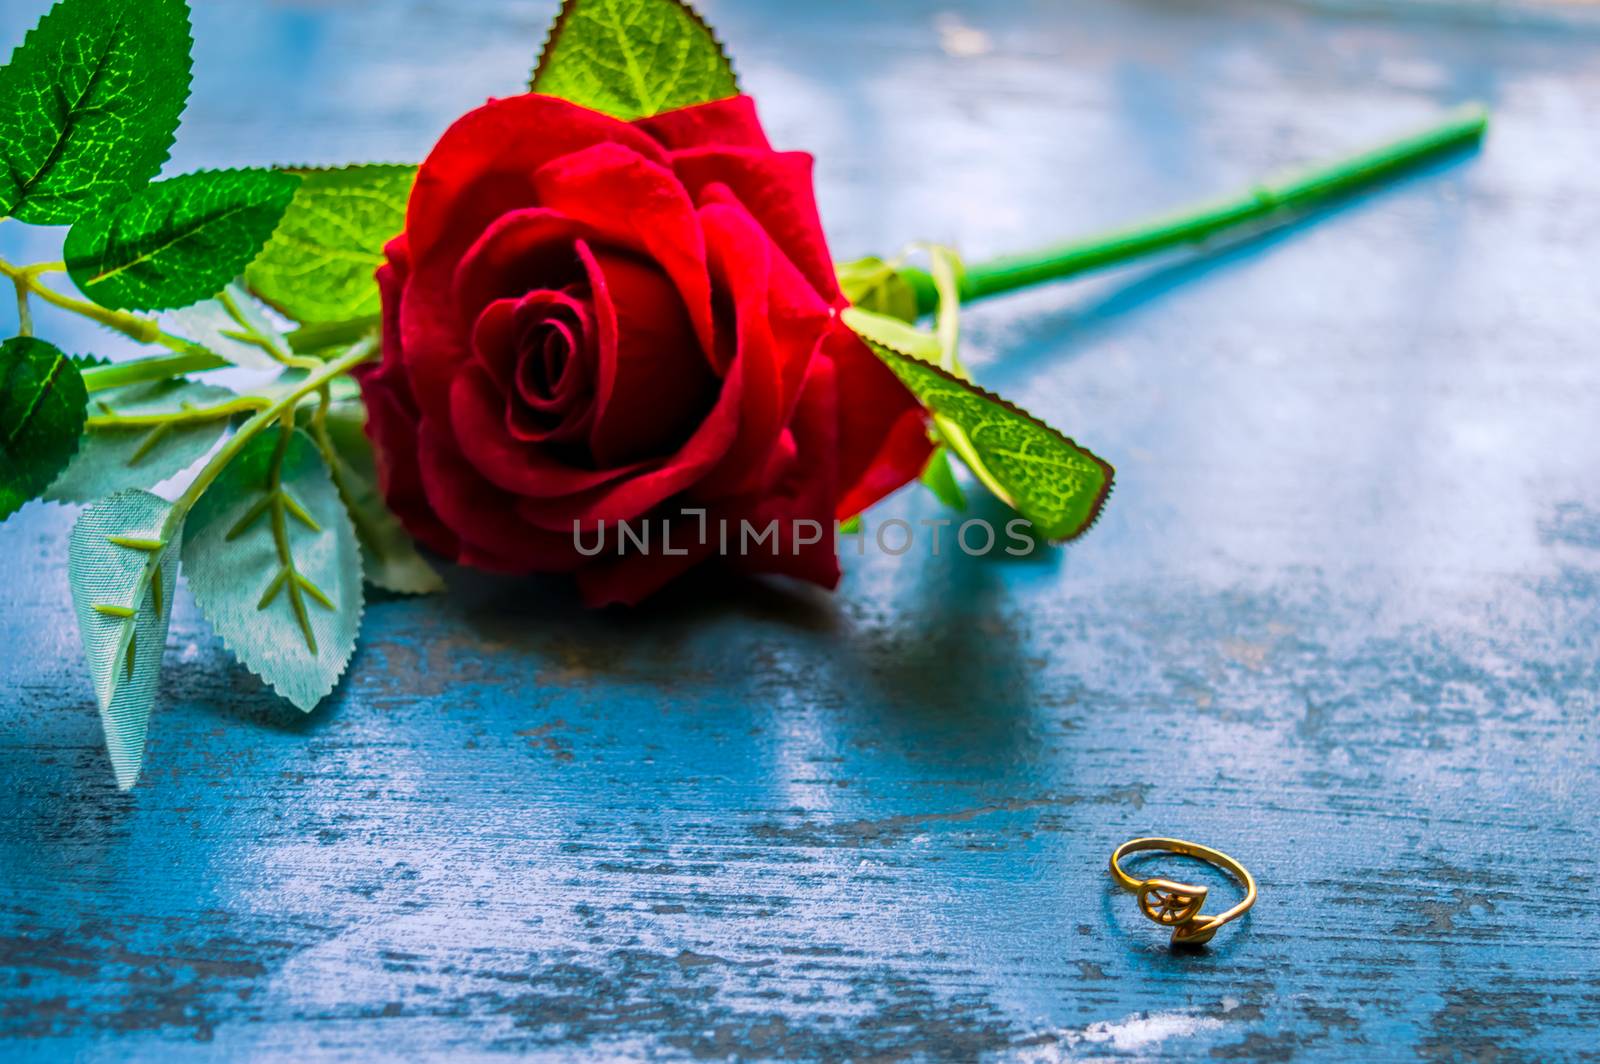 Close up gold engagement ring jewelry on rustic metal floor. Soft focus romantic Red rose flower in background. Love Proposal or Propose concept for valentines day wedding and holidays. Copy Space.